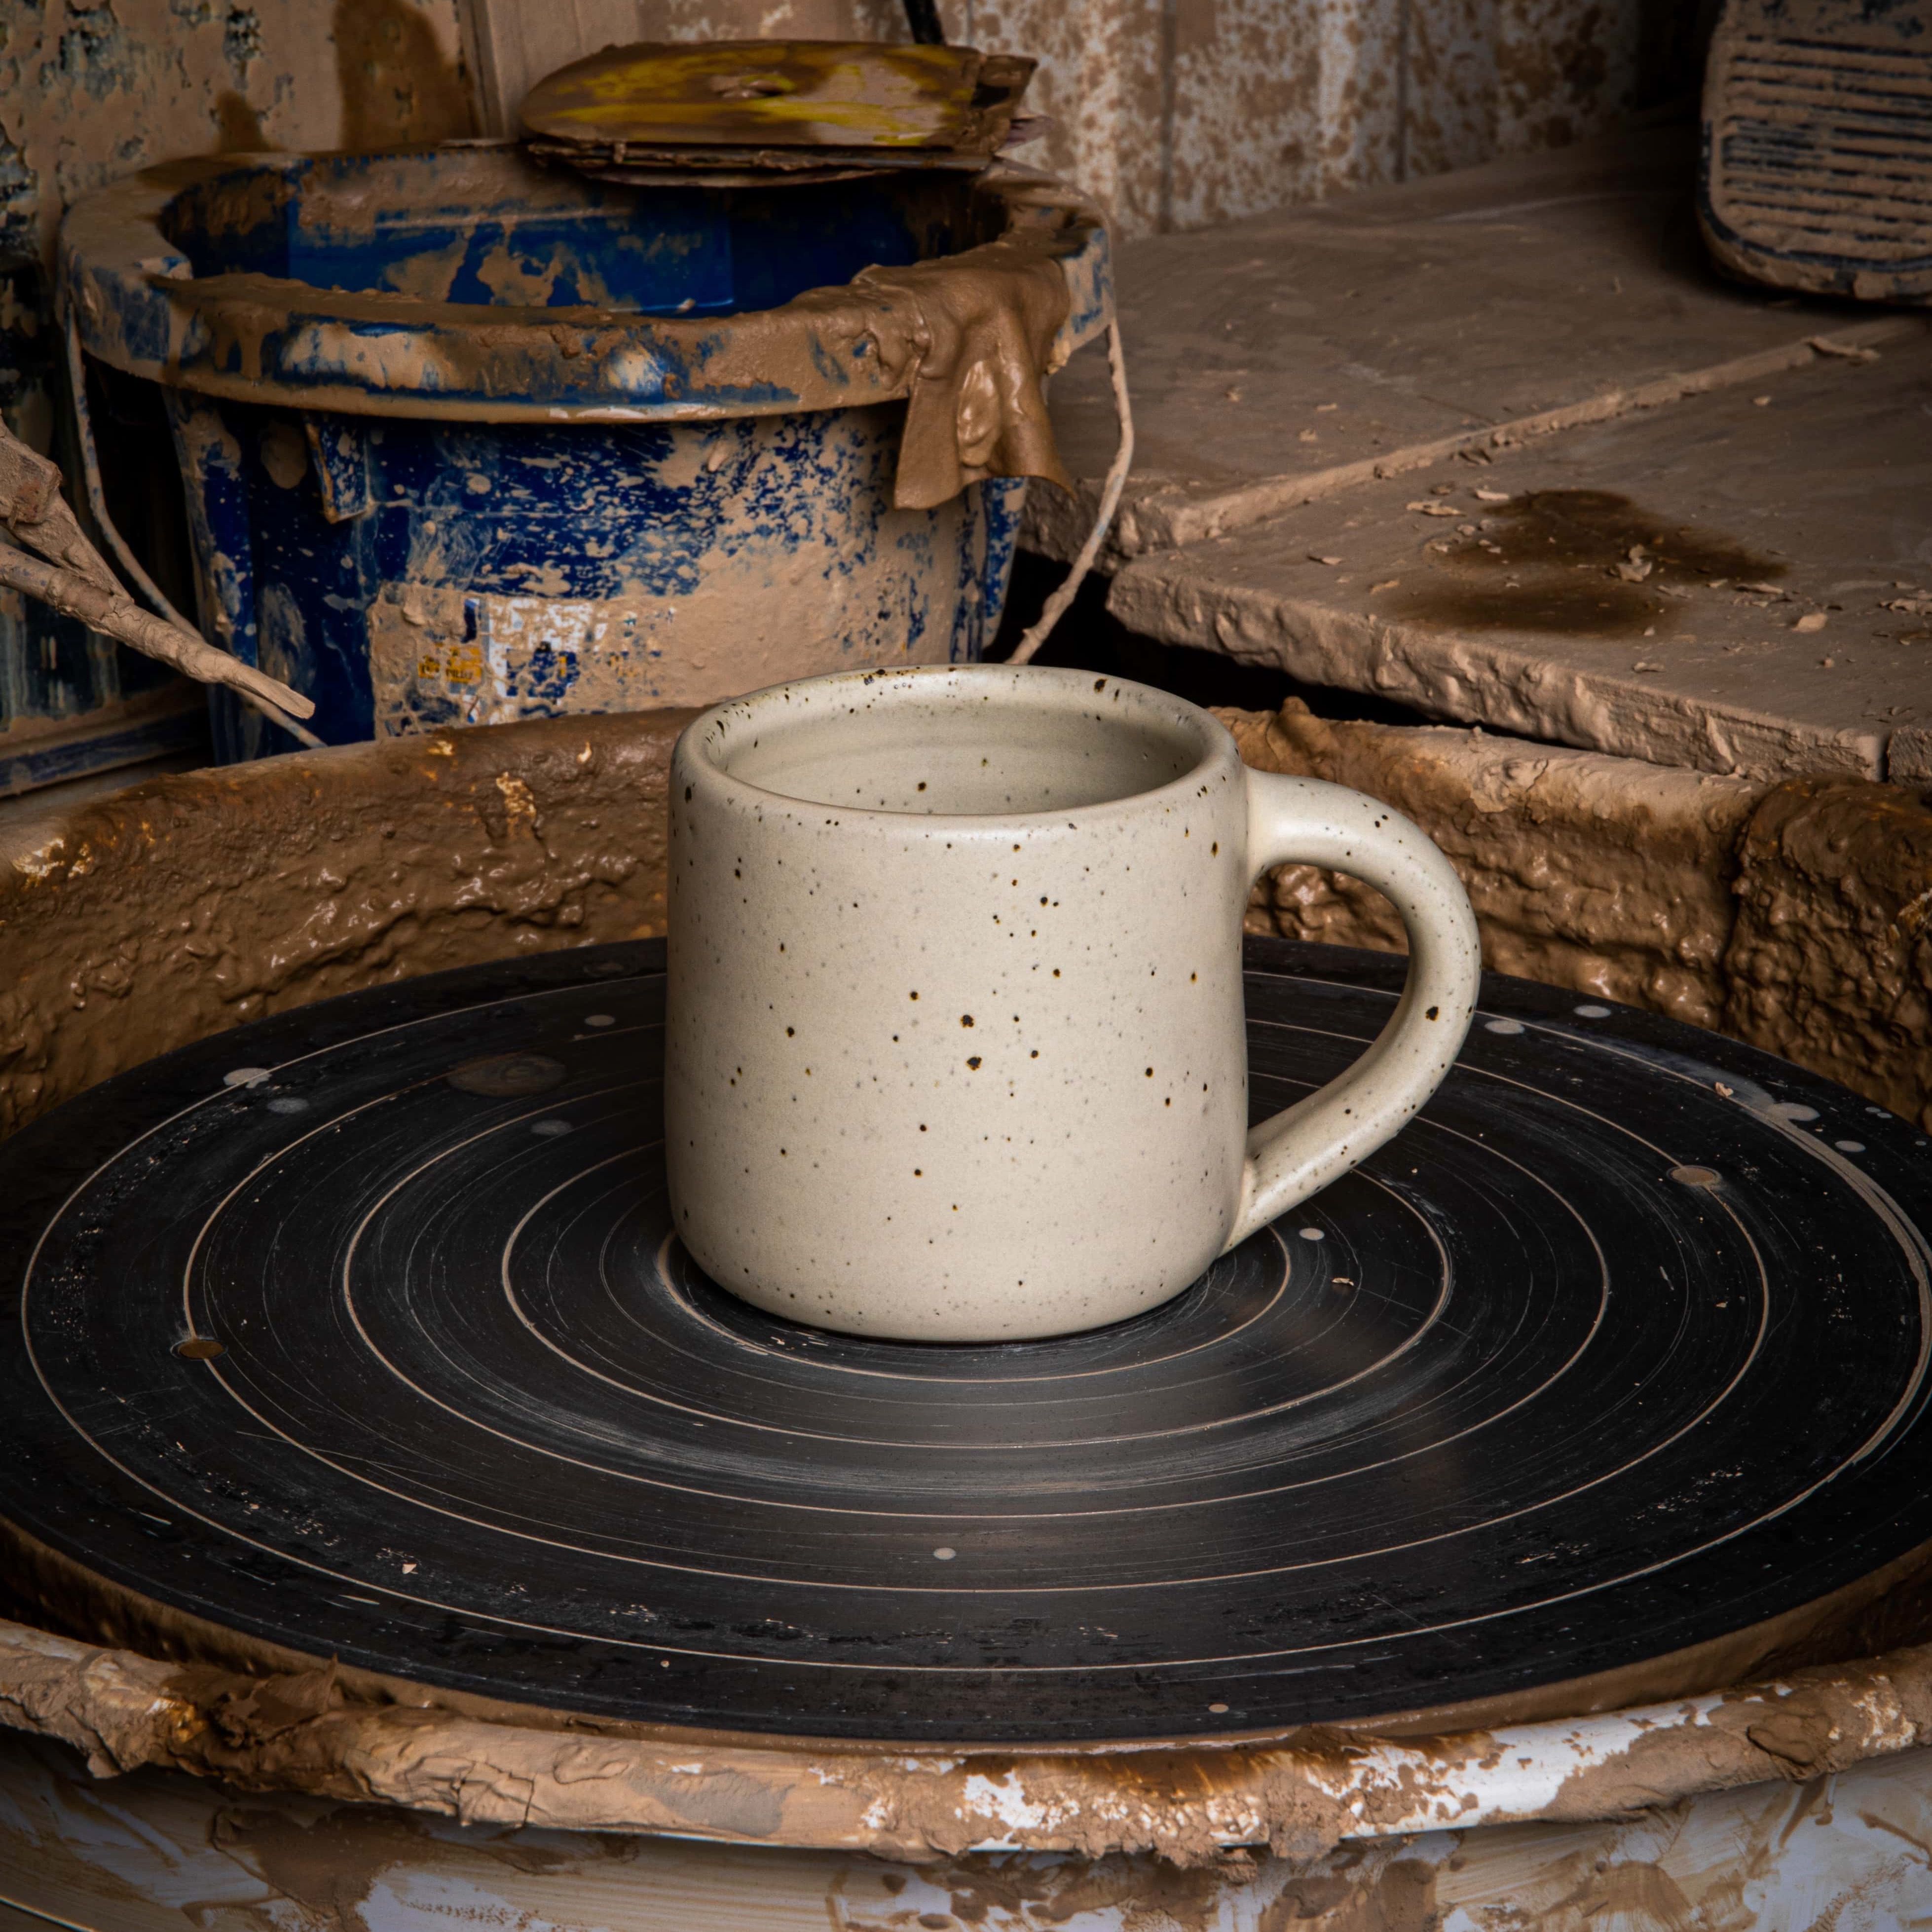 In a clay workshop environment, a medium sized ceramic mug with handle sits on a potter's wheel. The mug is in a warm, tan-toned, off-white color featuring iron speckles